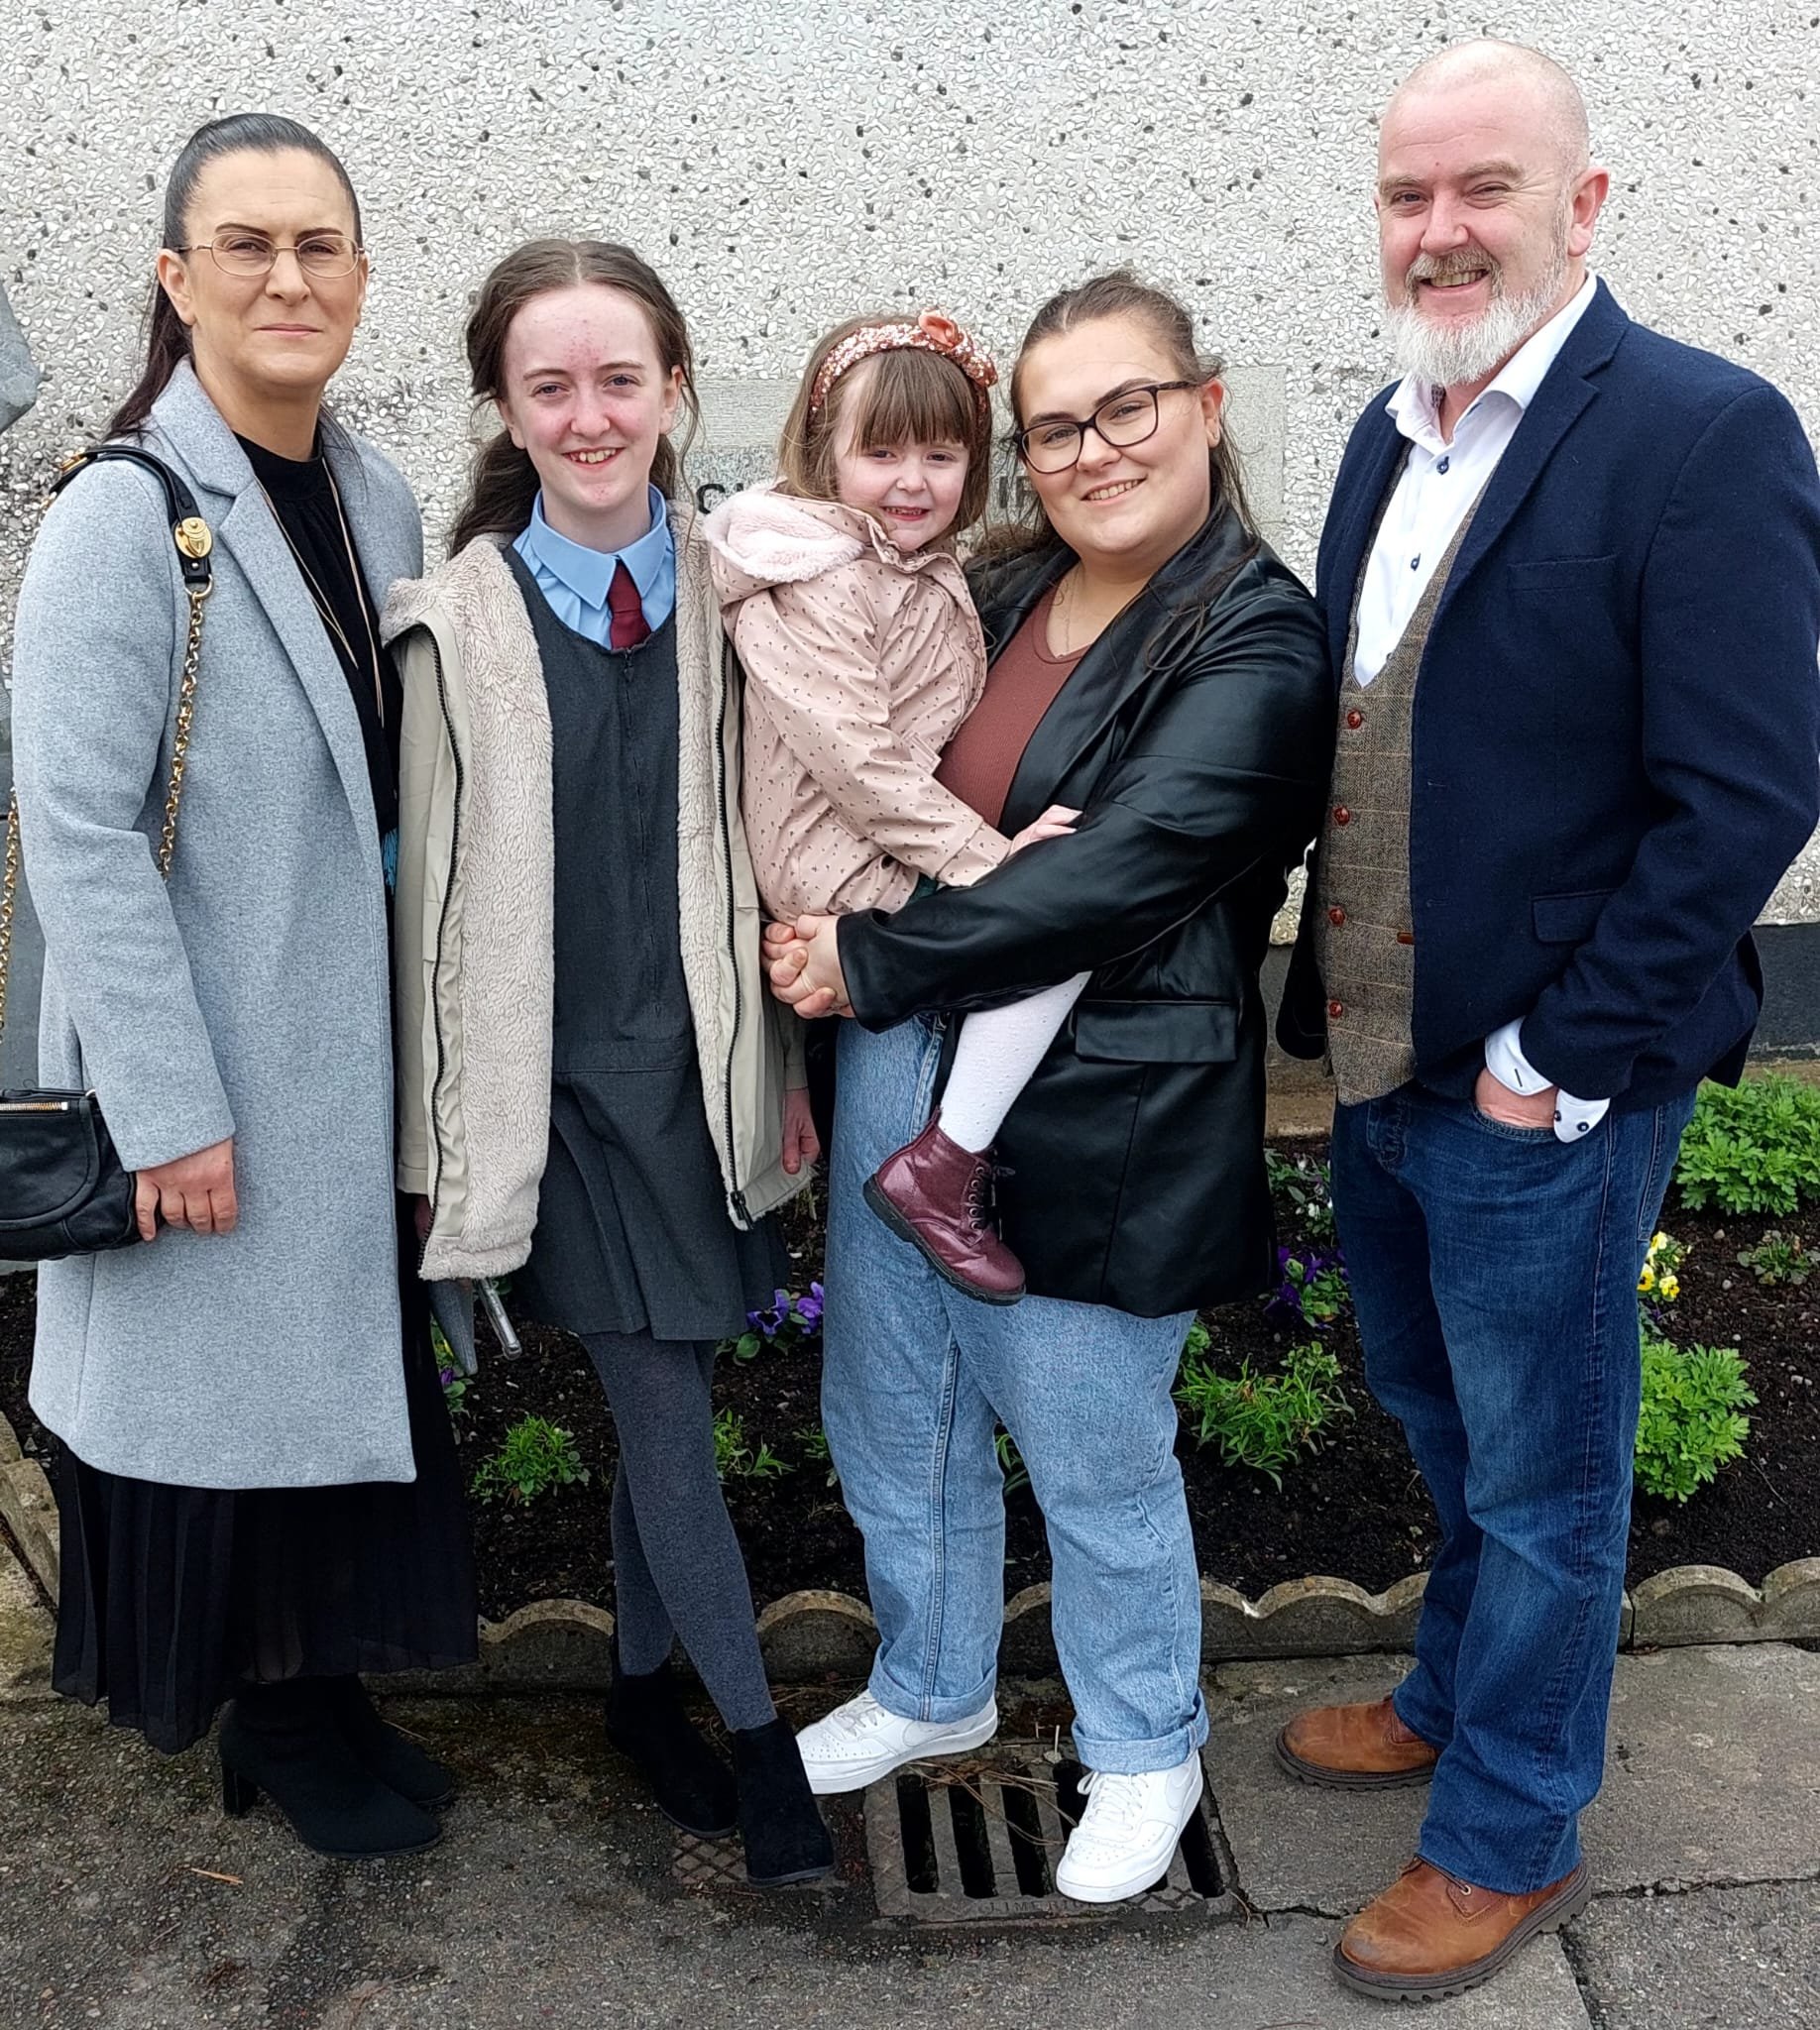 Claire with daughters Ciara, Charley, Caoimhe and husband Bren